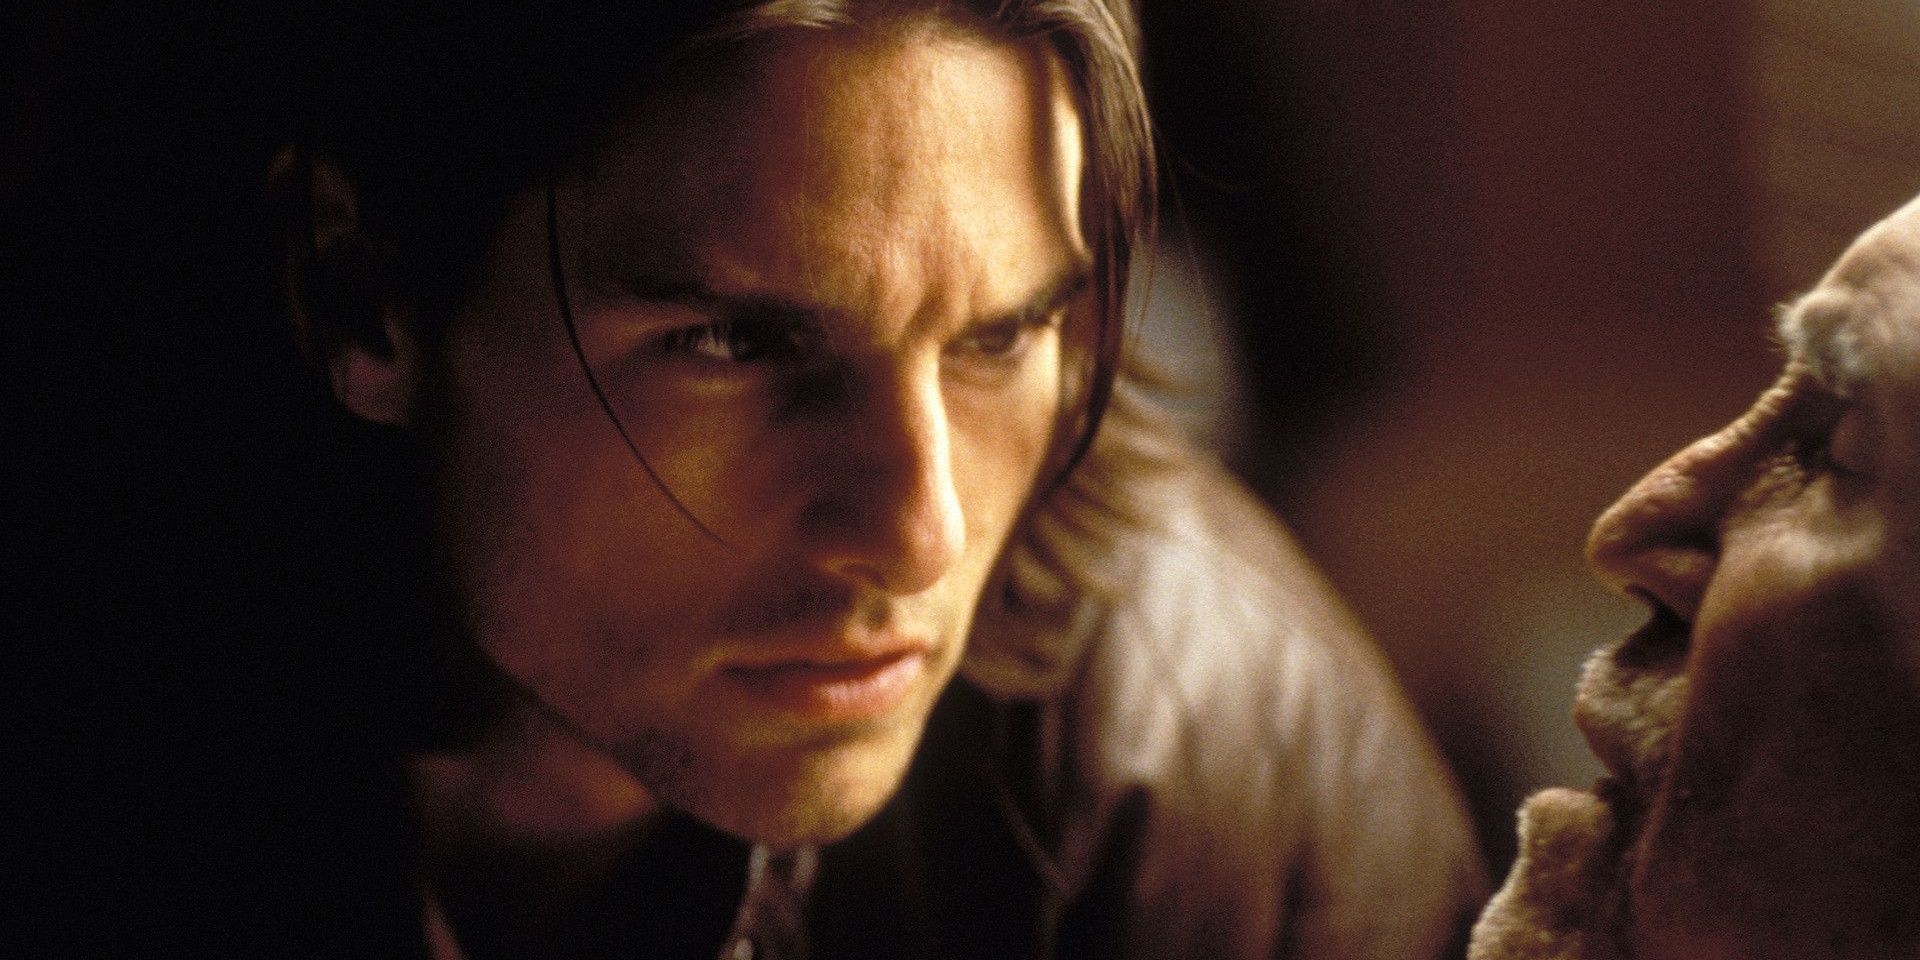 Tom Cruise talks to his dying father in Magnolia